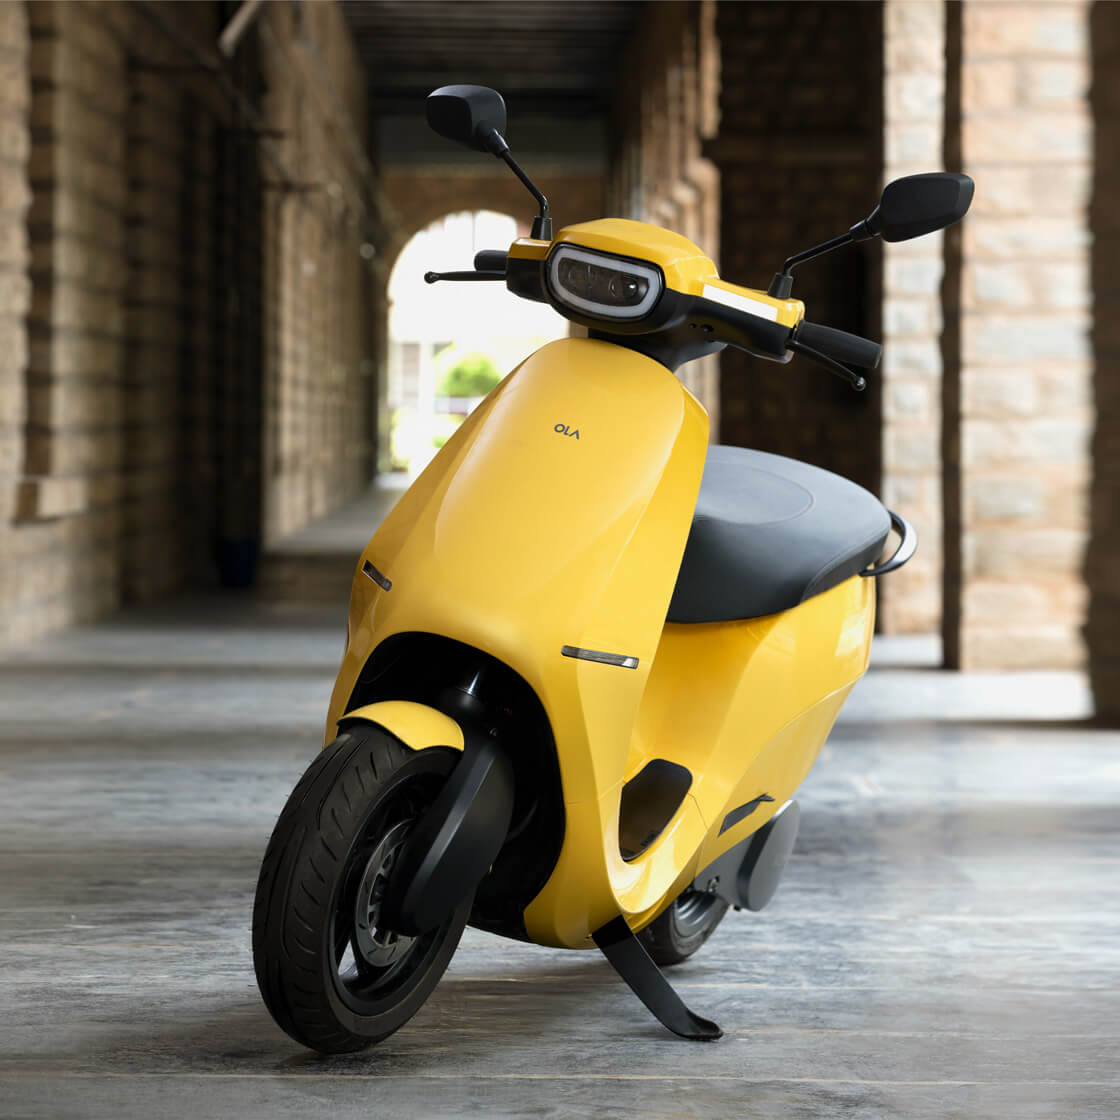 https://e-vehicleinfo.com/ola-electric-scooter-price-in-india-specification-highlights/